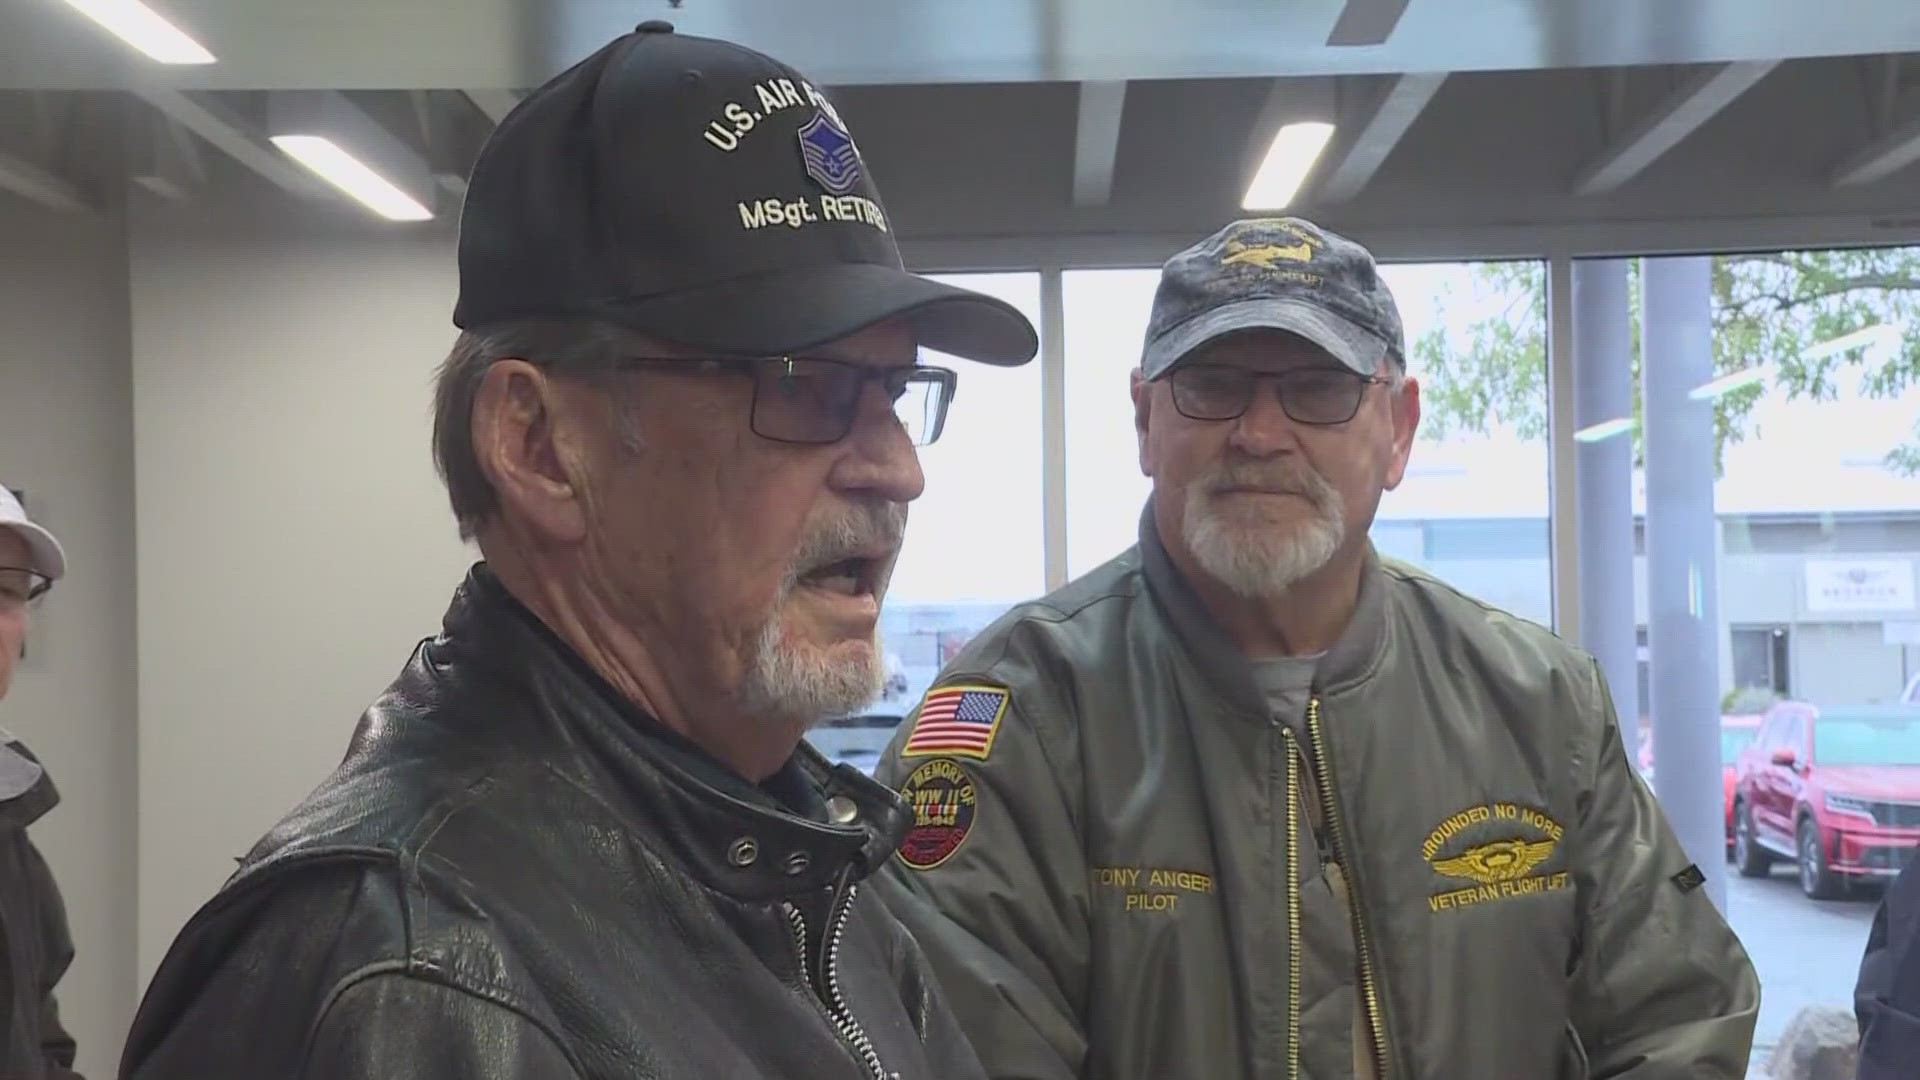 Terrance Schroeder and Hal Bergdahl are the honored veterans and honor flight recipients.